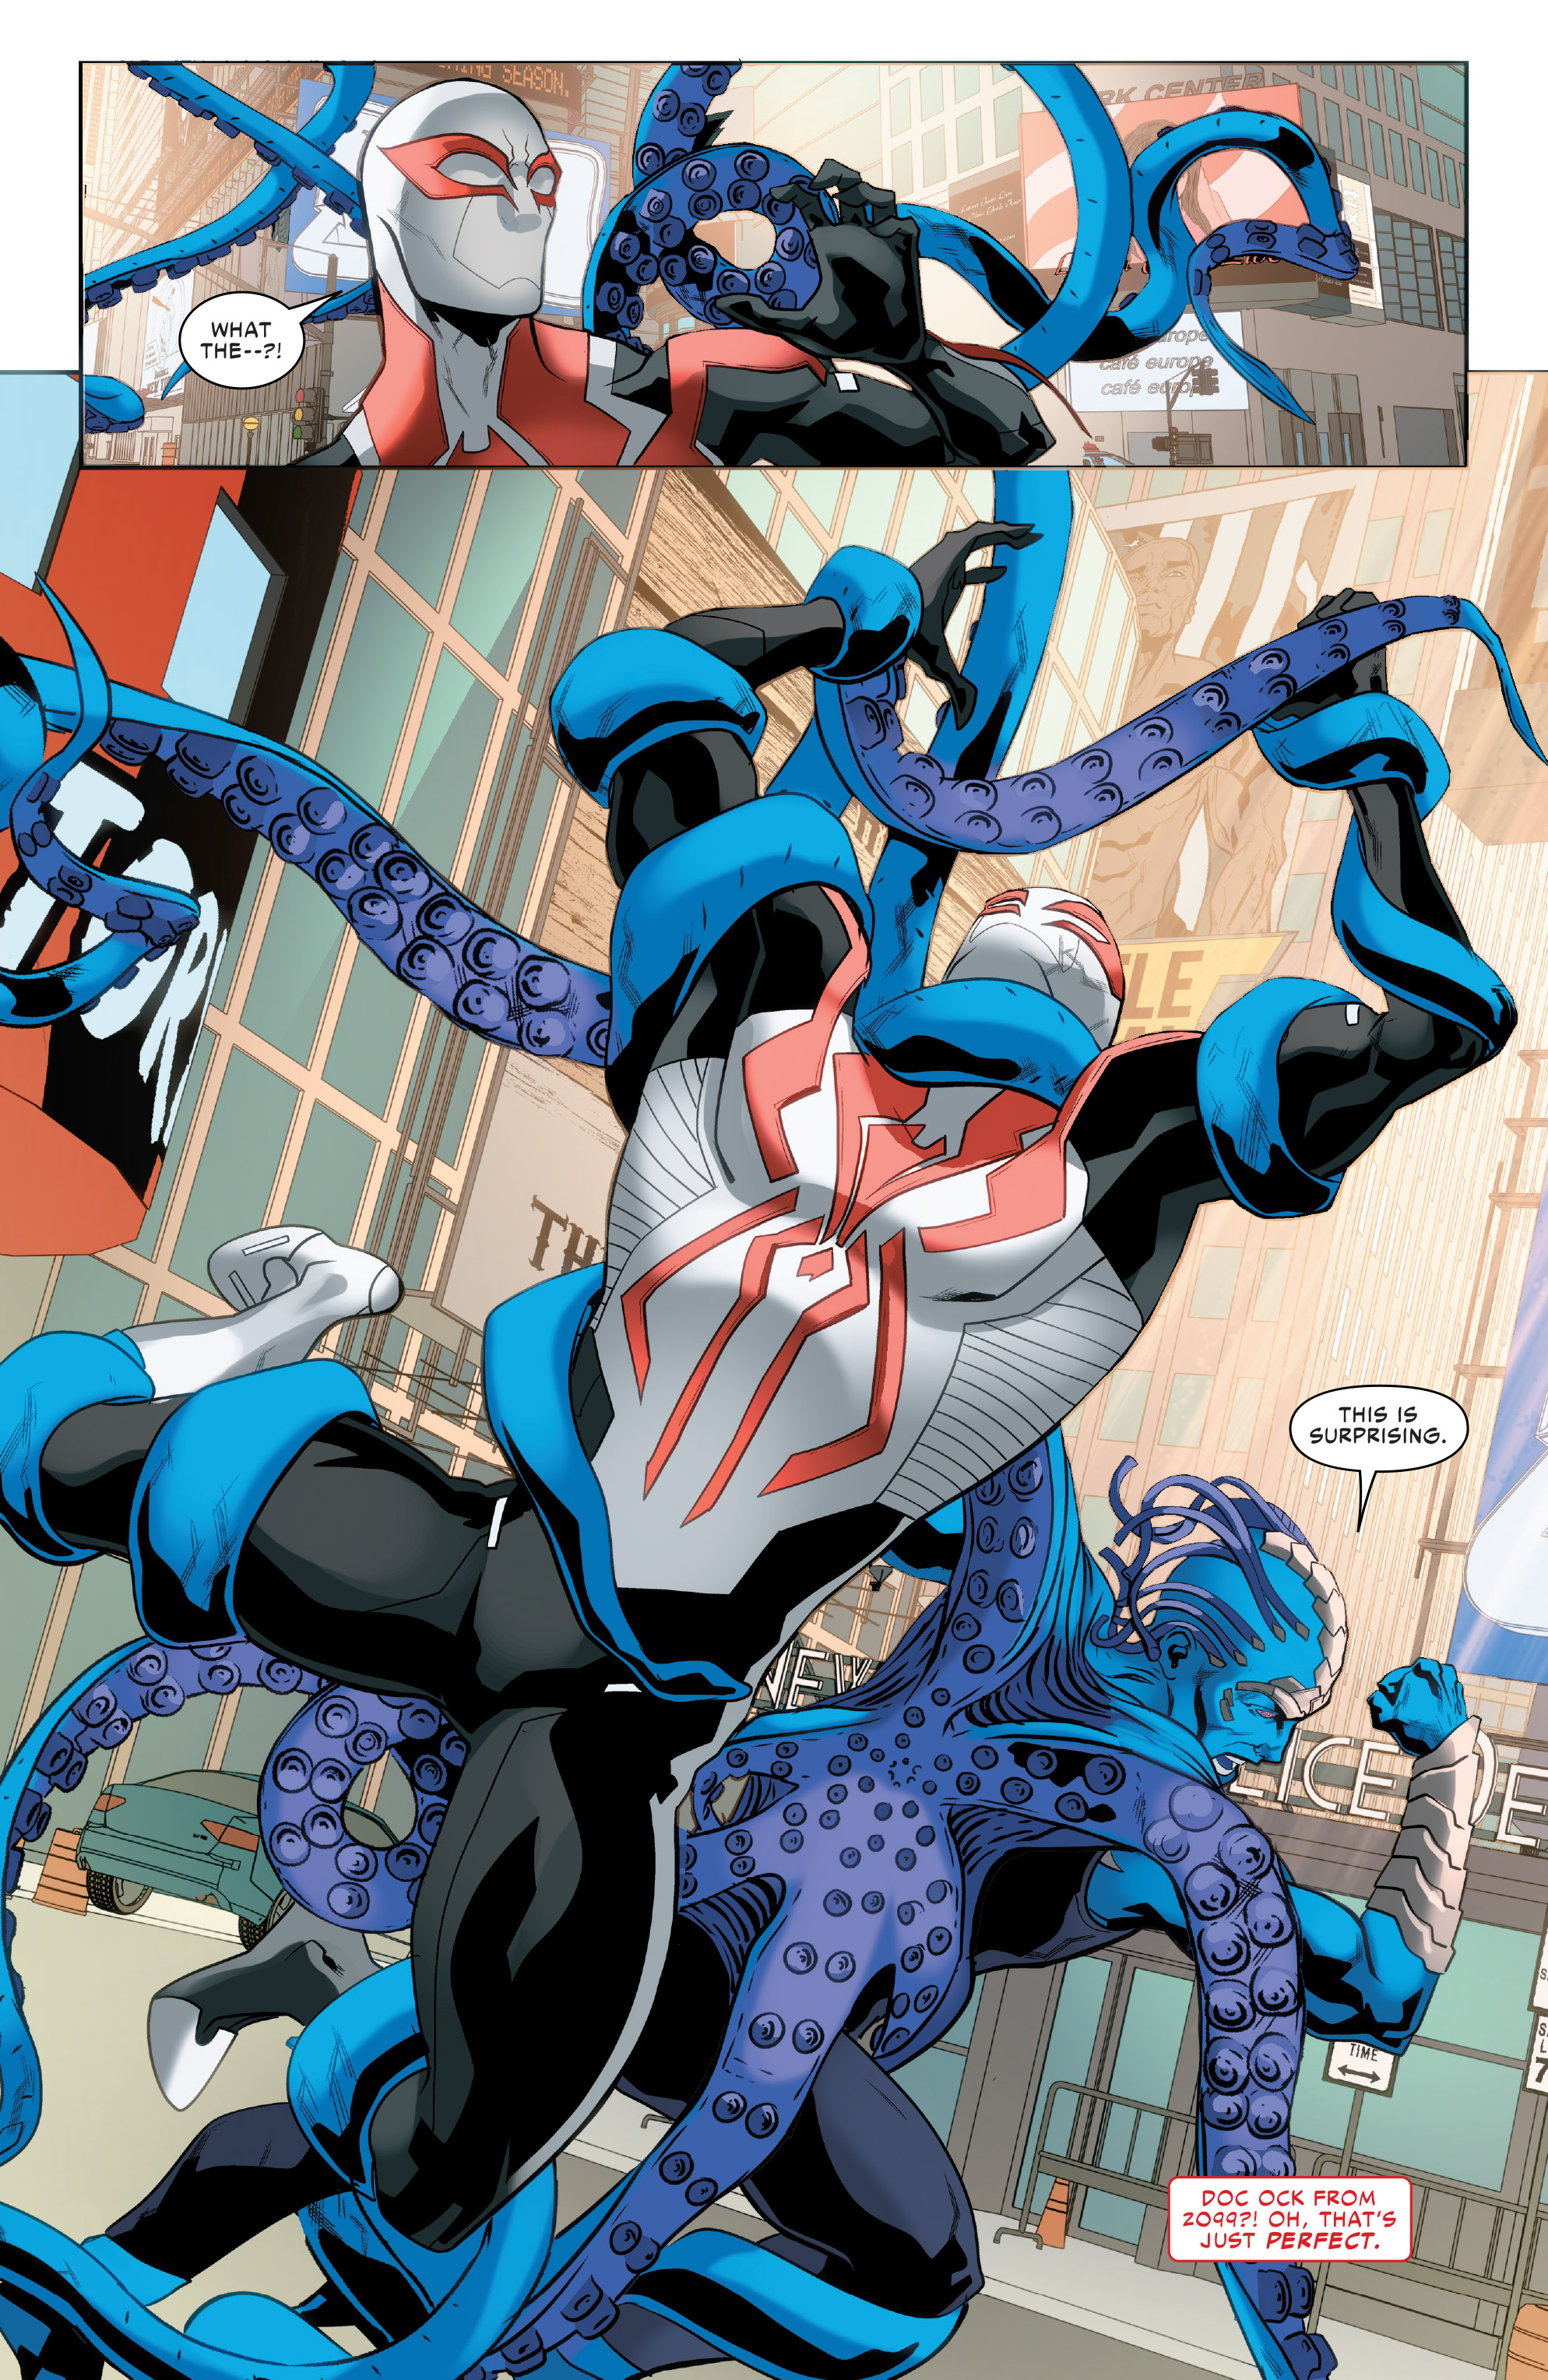 Xxx Bf 2099 - Spider Man 2099 2015 Issue 23 | Read Spider Man 2099 2015 Issue 23 comic  online in high quality. Read Full Comic online for free - Read comics  online in high quality .|viewcomiconline.com